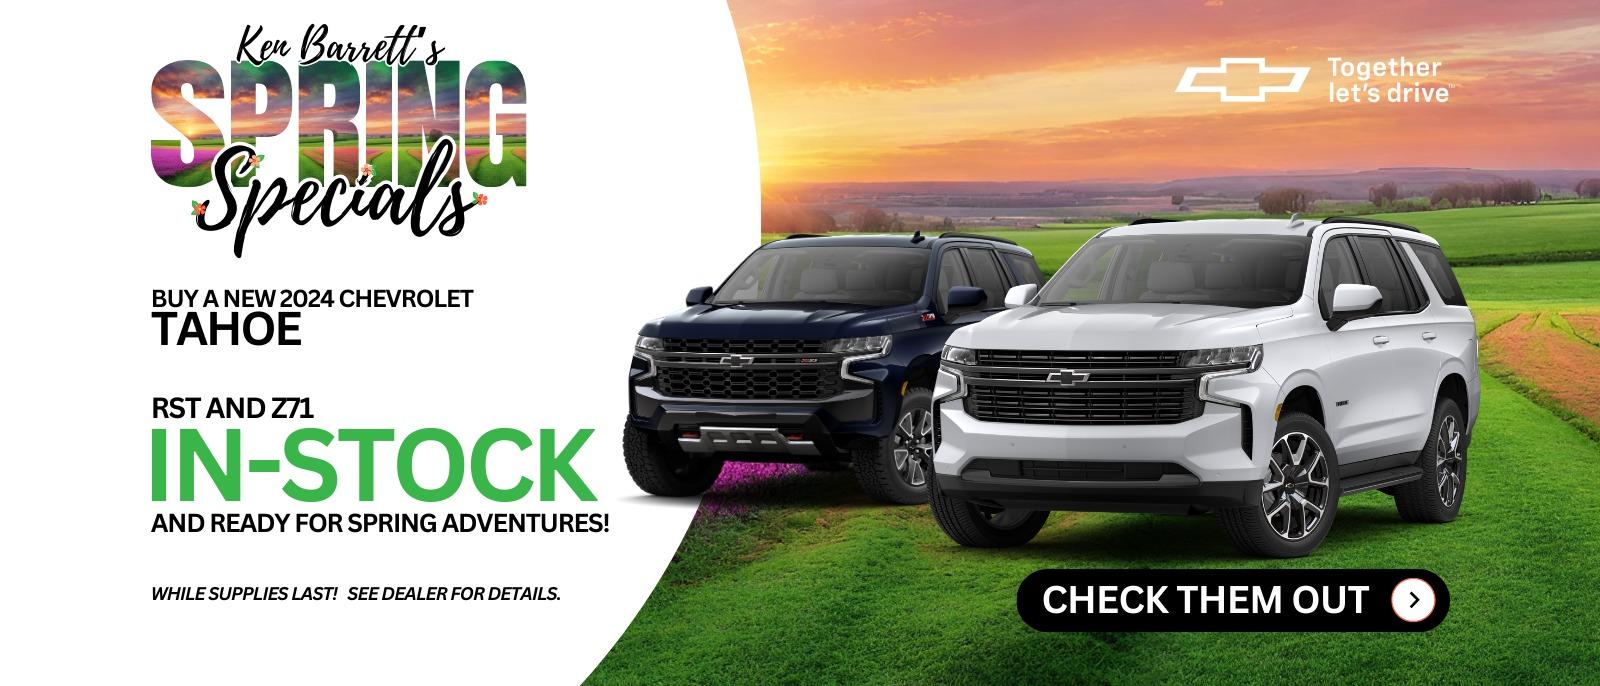 Ken Barrett's Spring Specials new deals on new Chevrolets in Batavia NY.  Find the Chevy deal for you.  Check out the new car deal on this brand new Chevrolet Tahoe